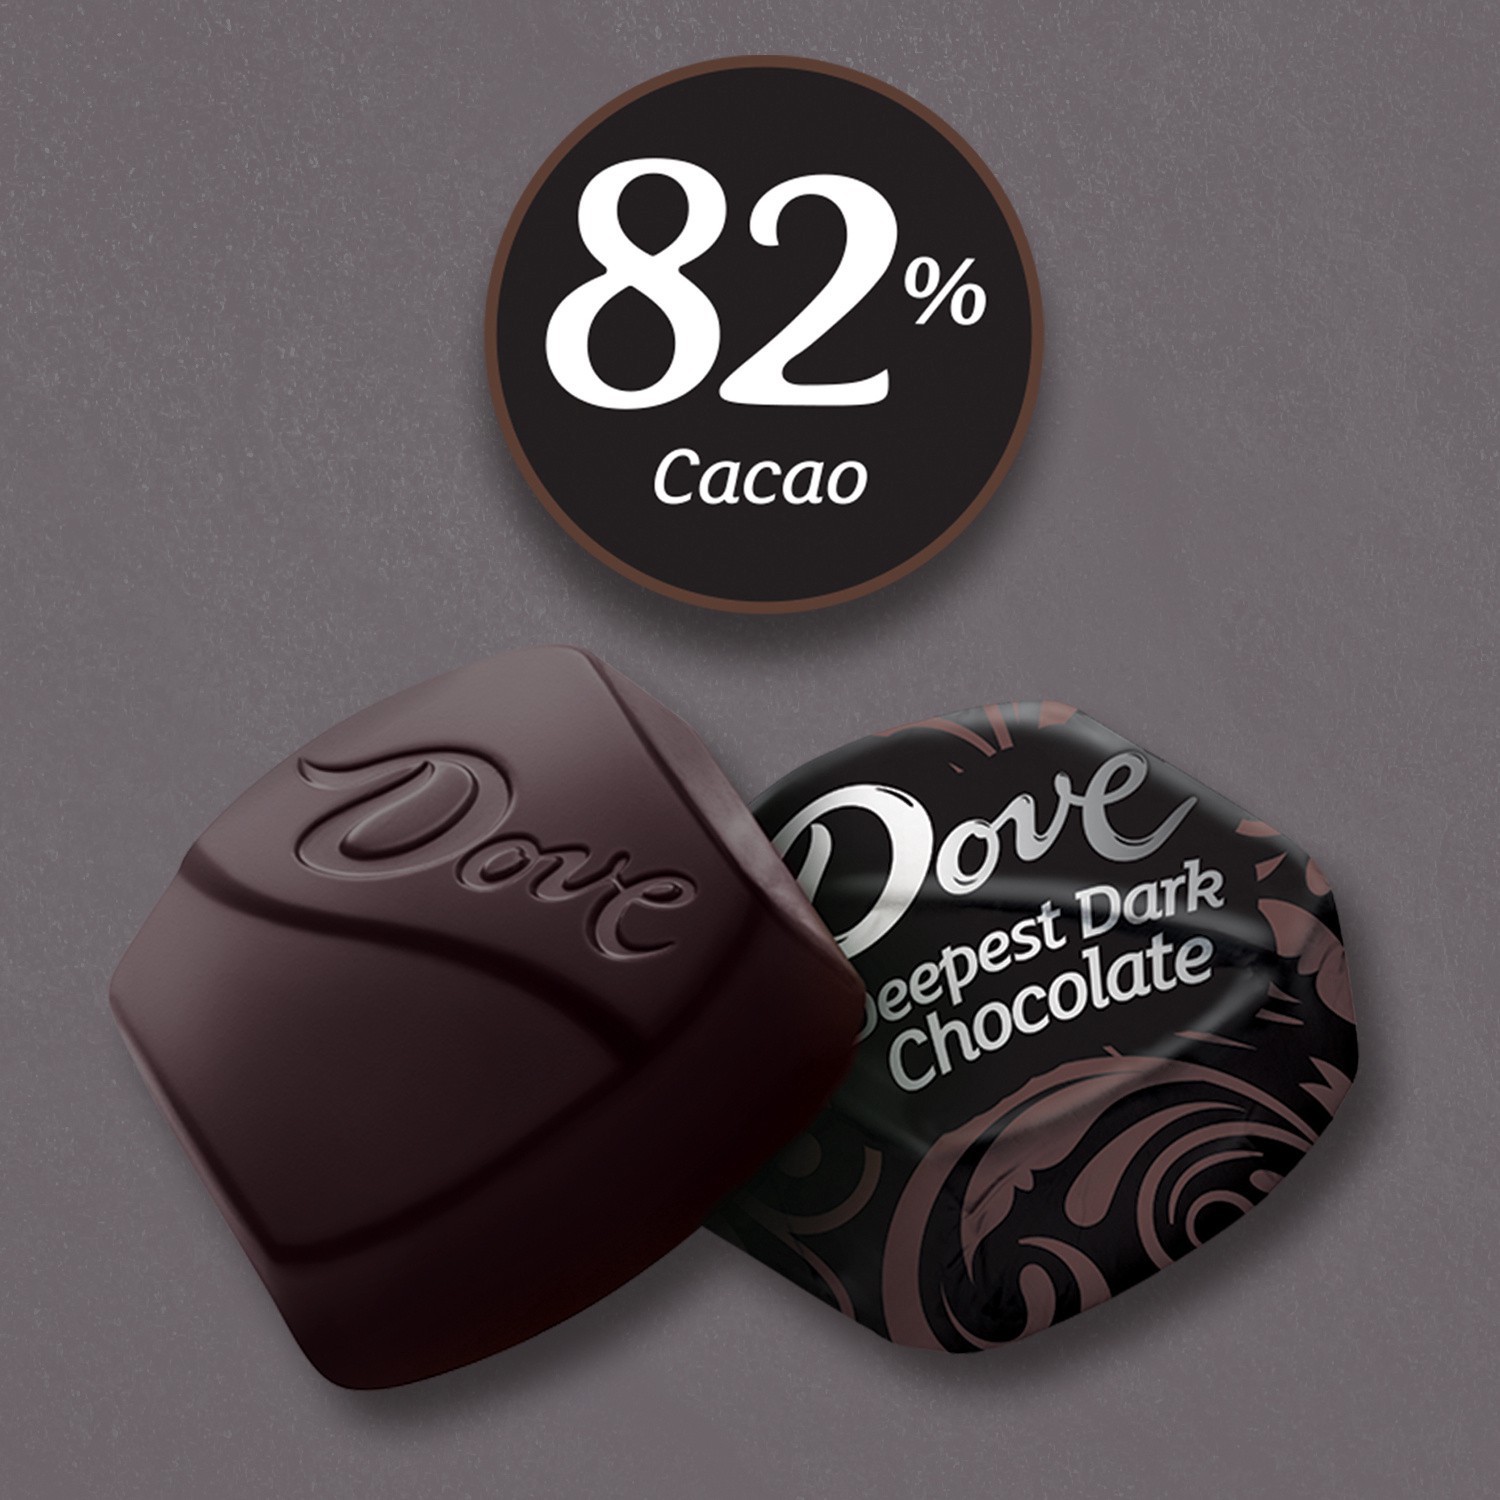 slide 3 of 8, DOVE PROMISES Deepest Dark Chocolate Candy 82% Cacao, Sharing Size, 7.23 oz Bag, 7.23 oz